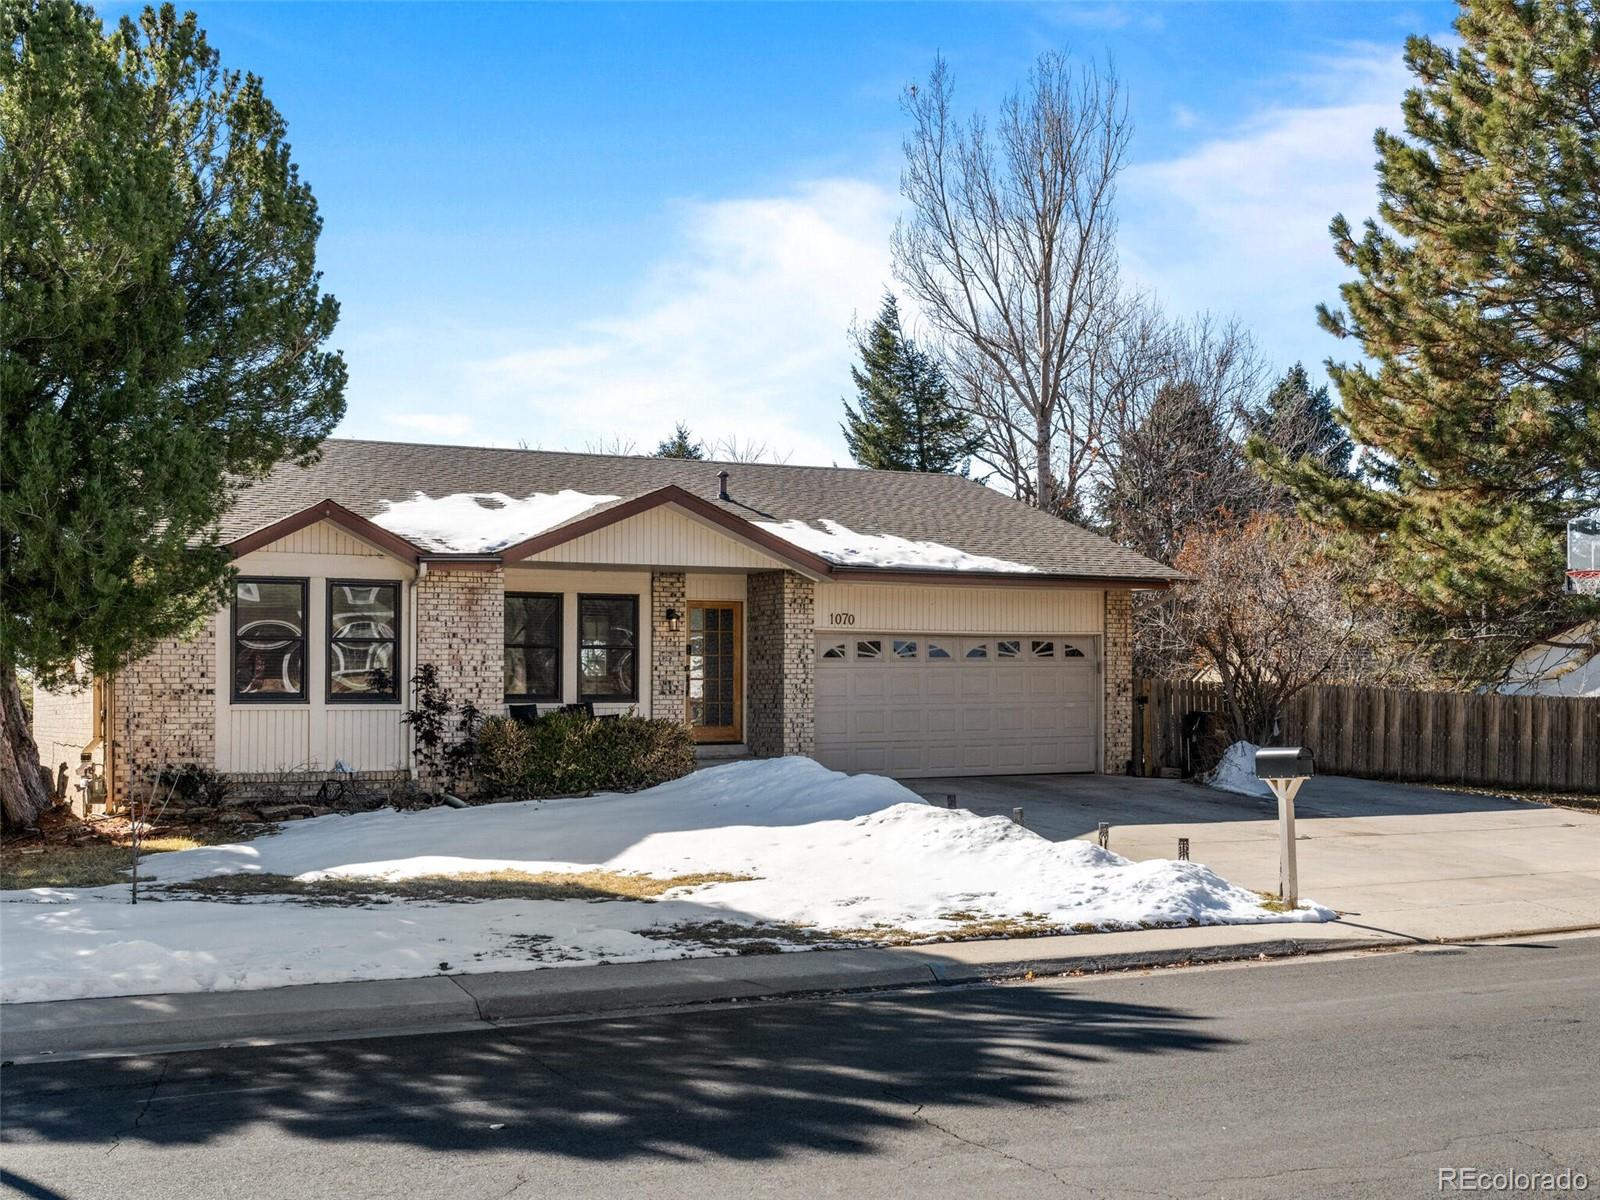 1070 e 15th avenue, broomfield sold home. Closed on 2024-05-01 for $670,000.